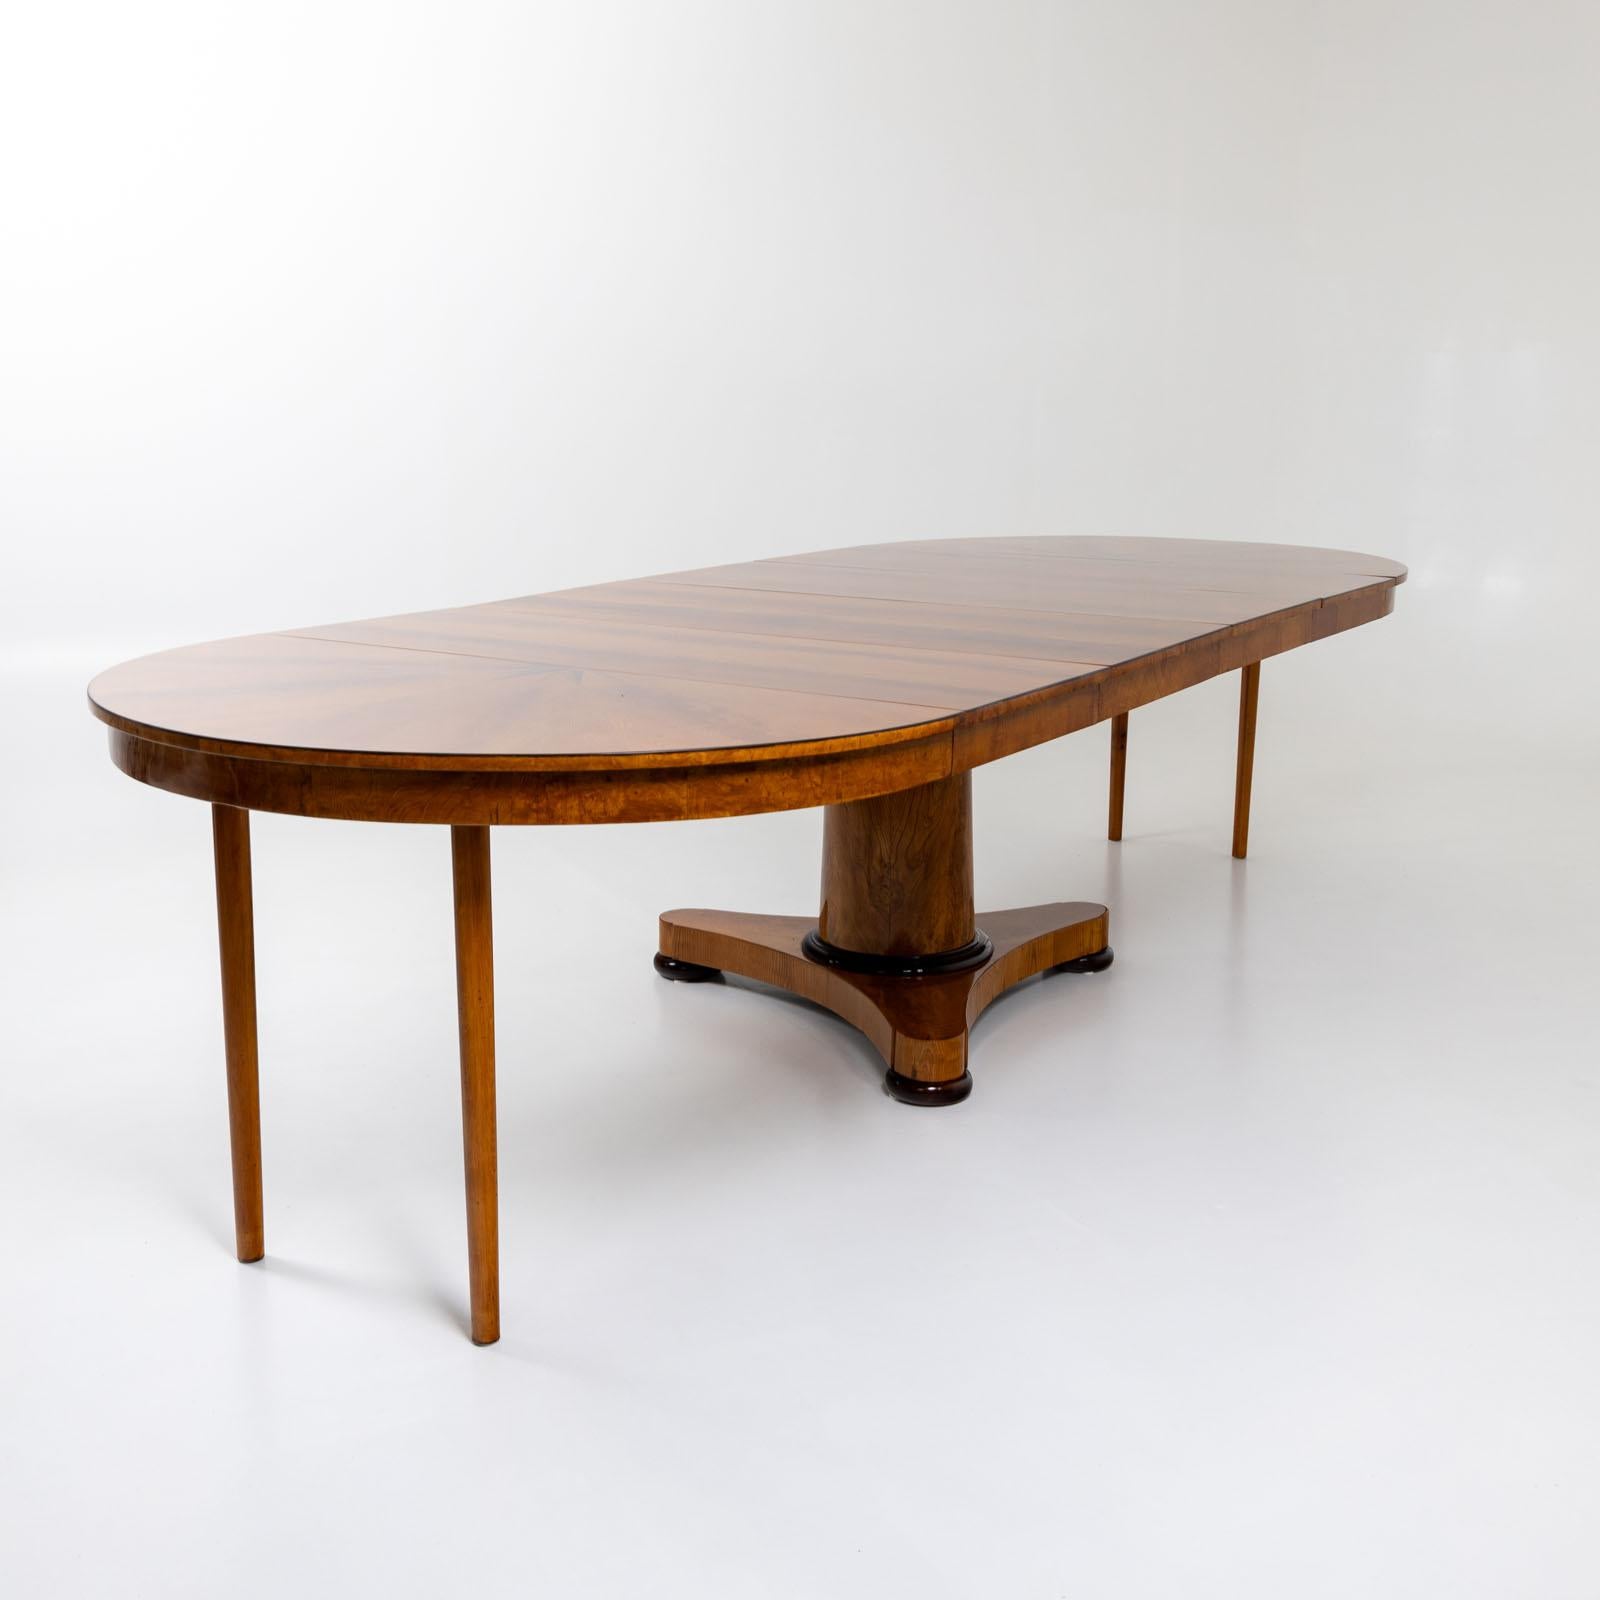 Early 19th Century Biedermeier pull-out Dining Table in Ash, Germany, around 1820 For Sale